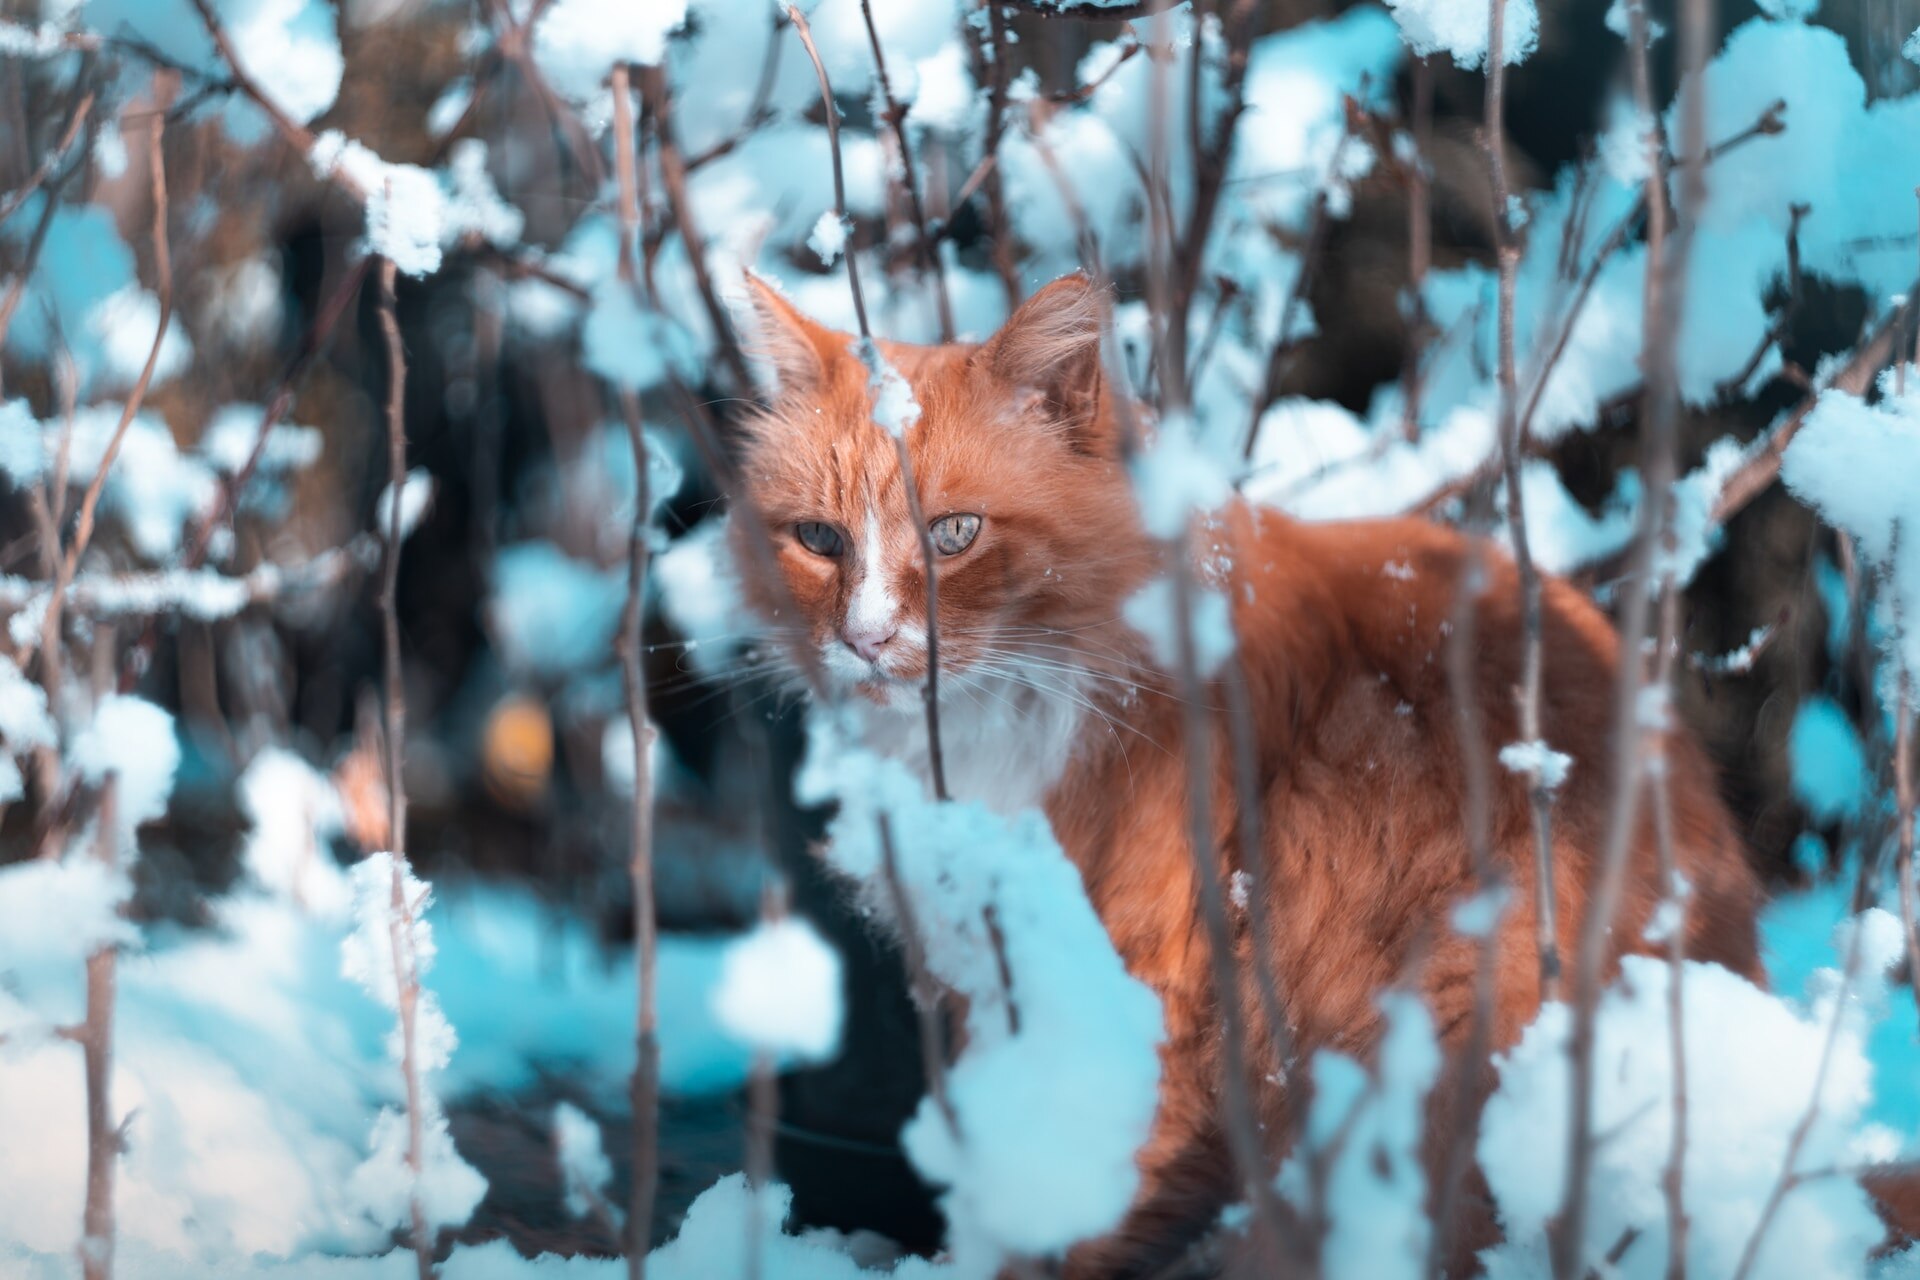 A feral cat hiding in the bush in a snowy forest